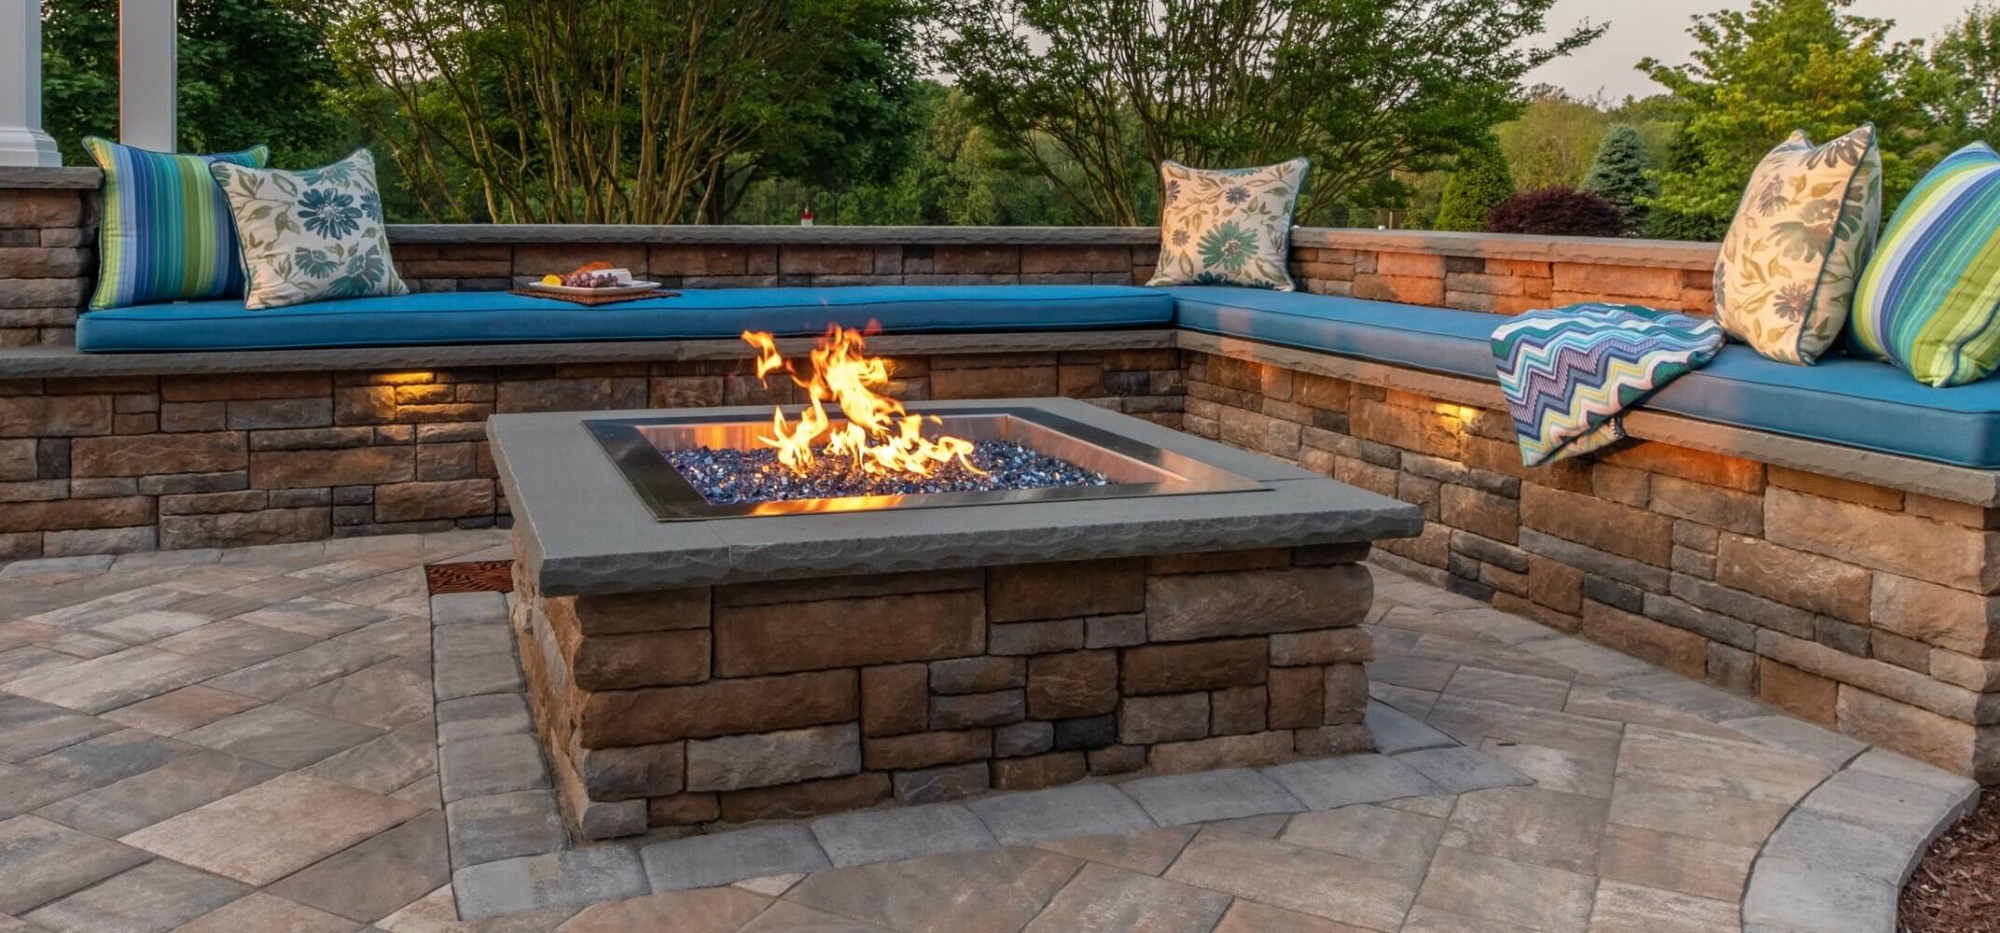 Natural Gas Fire Pits burn clean, are easy to use and never run out of fuel